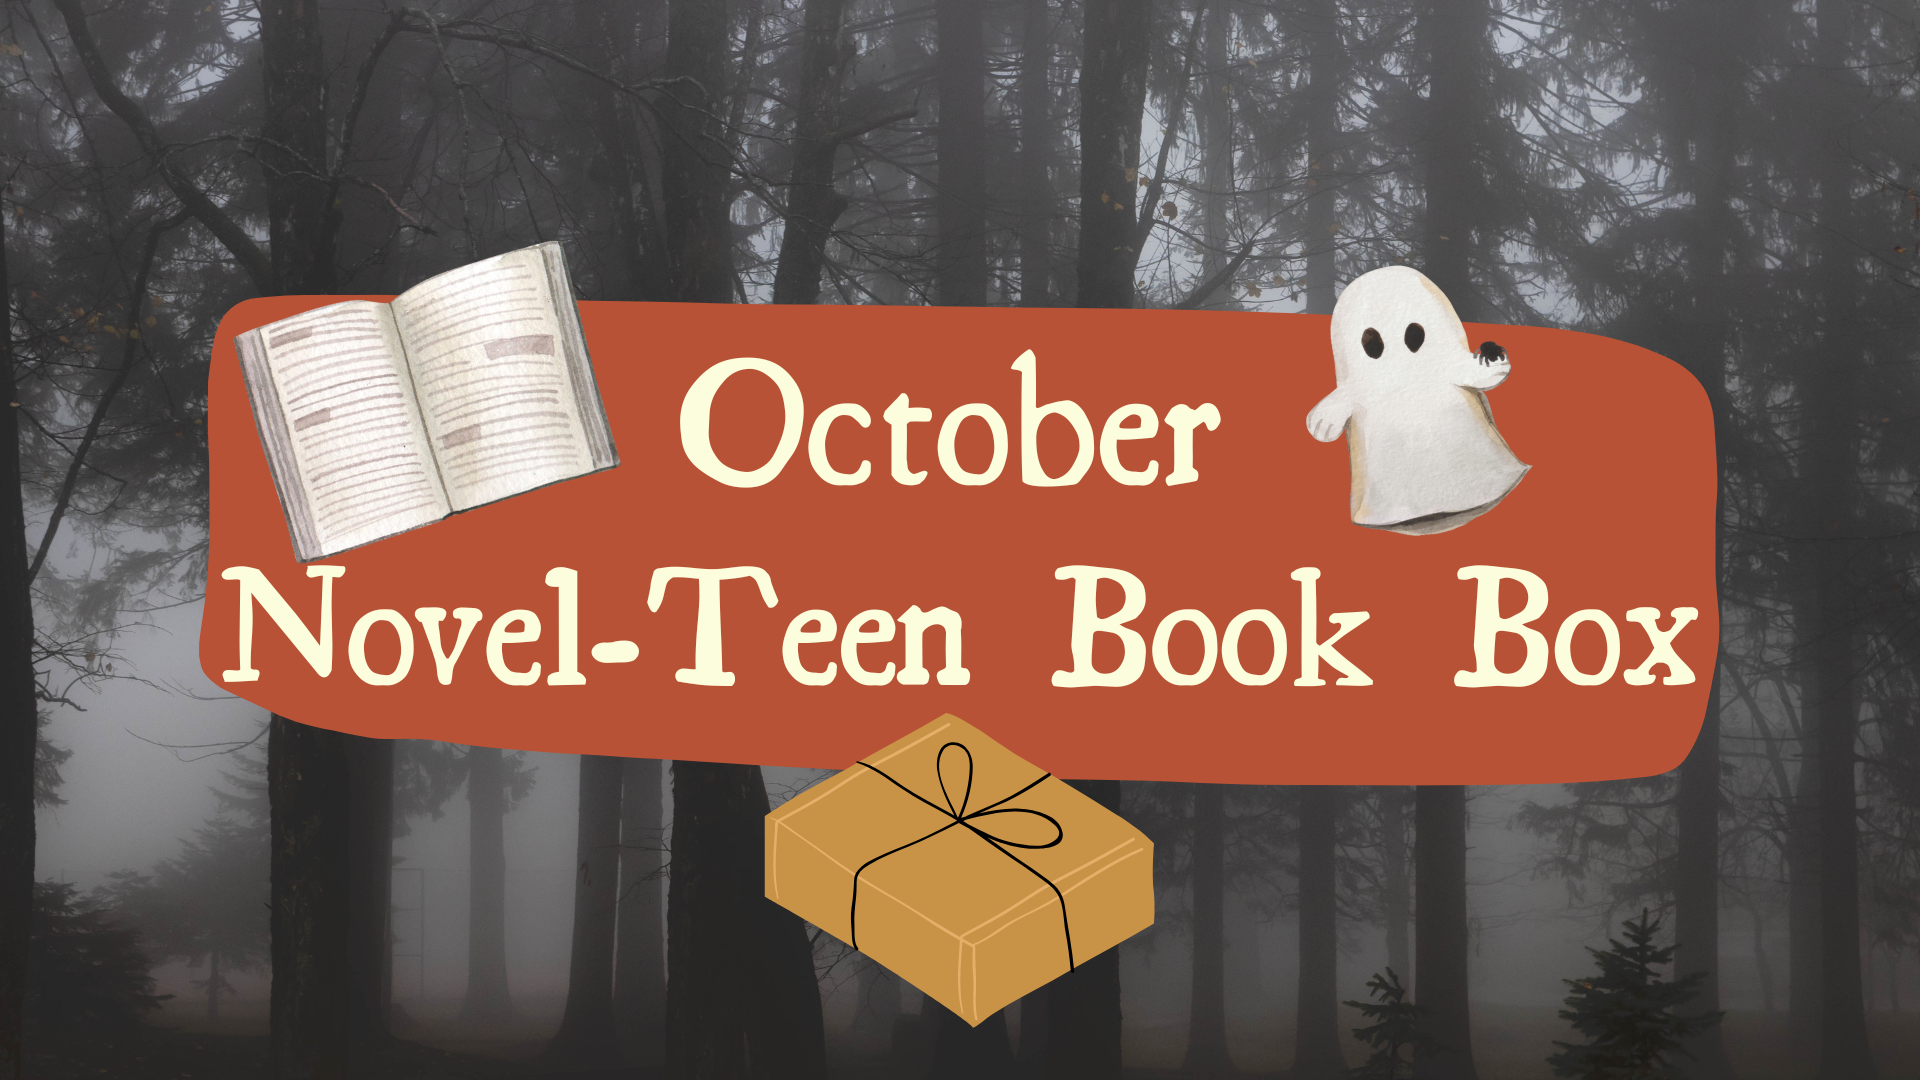 image of a foggy forest; October Novel-Teen Book Box